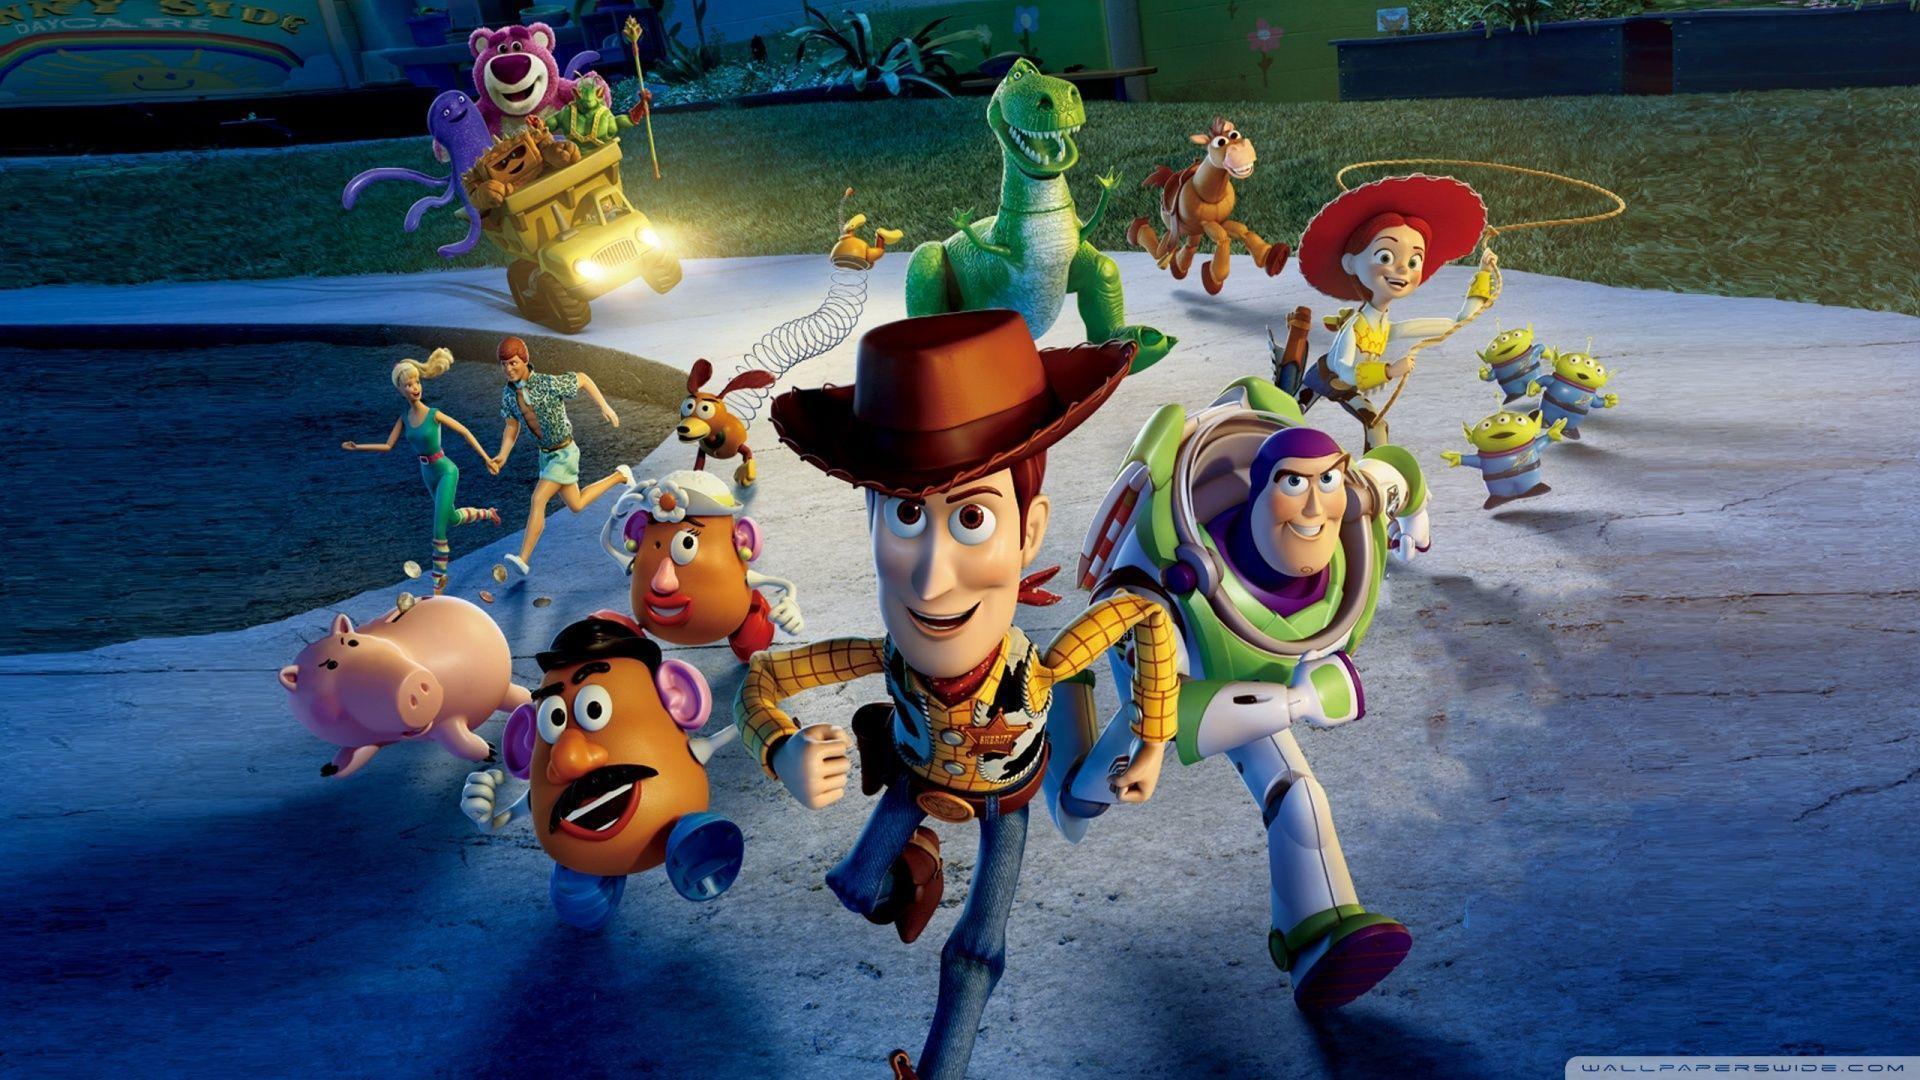 Toy story 1 2 3 wallpaper HD 1920x1080 background